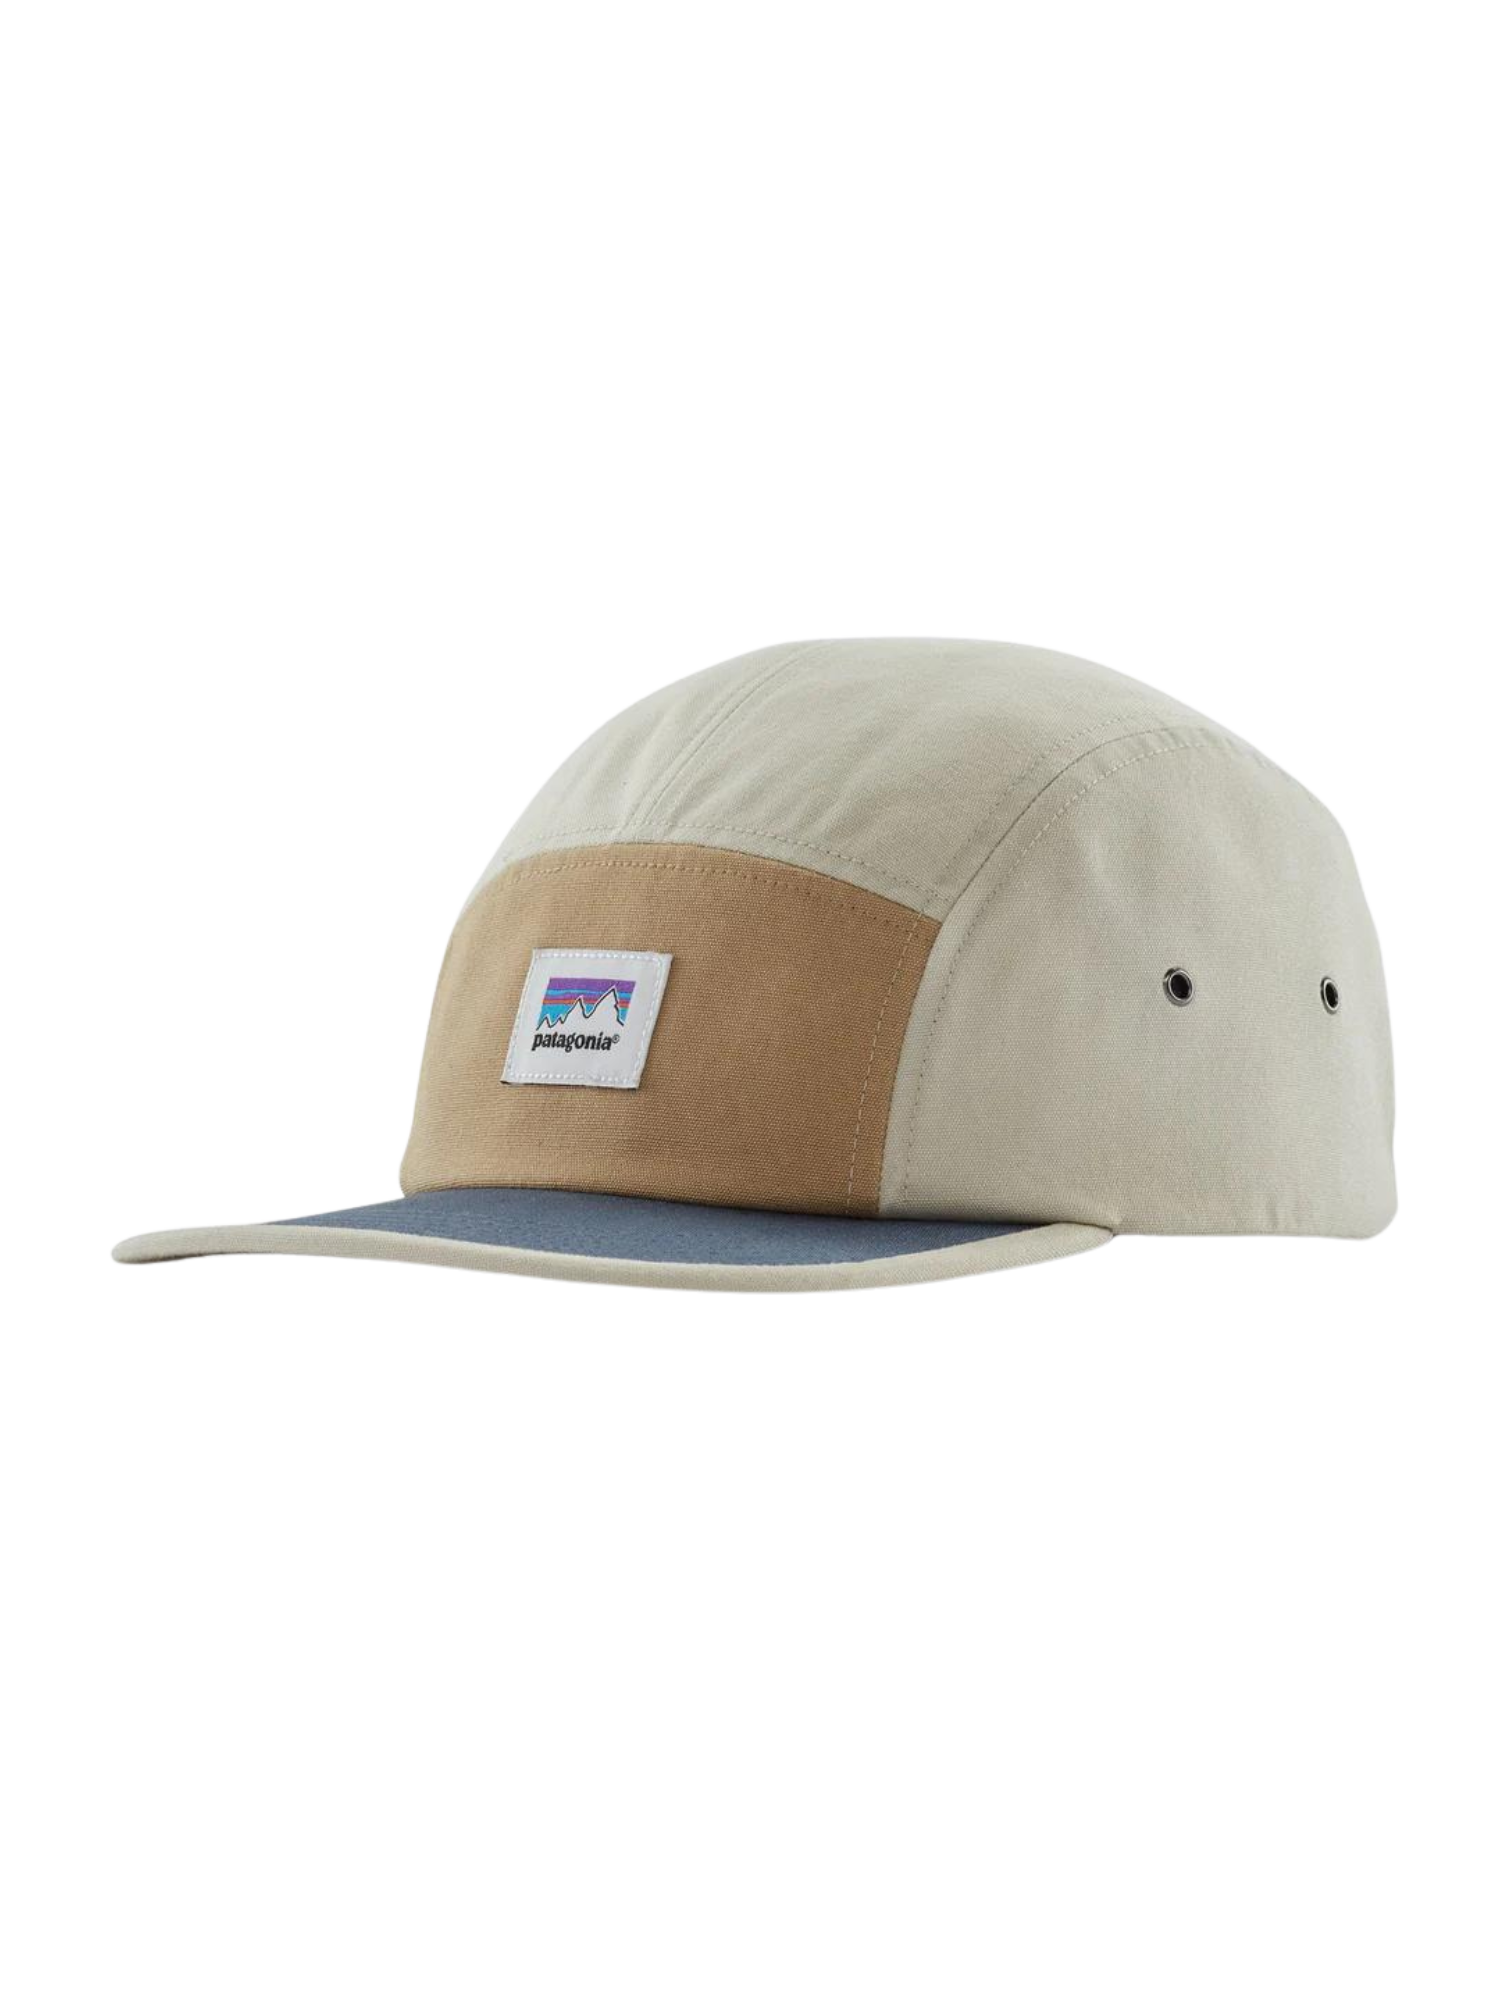 Patagonia Graphic Maclure Hat - Shop Sticker - Classic Tan